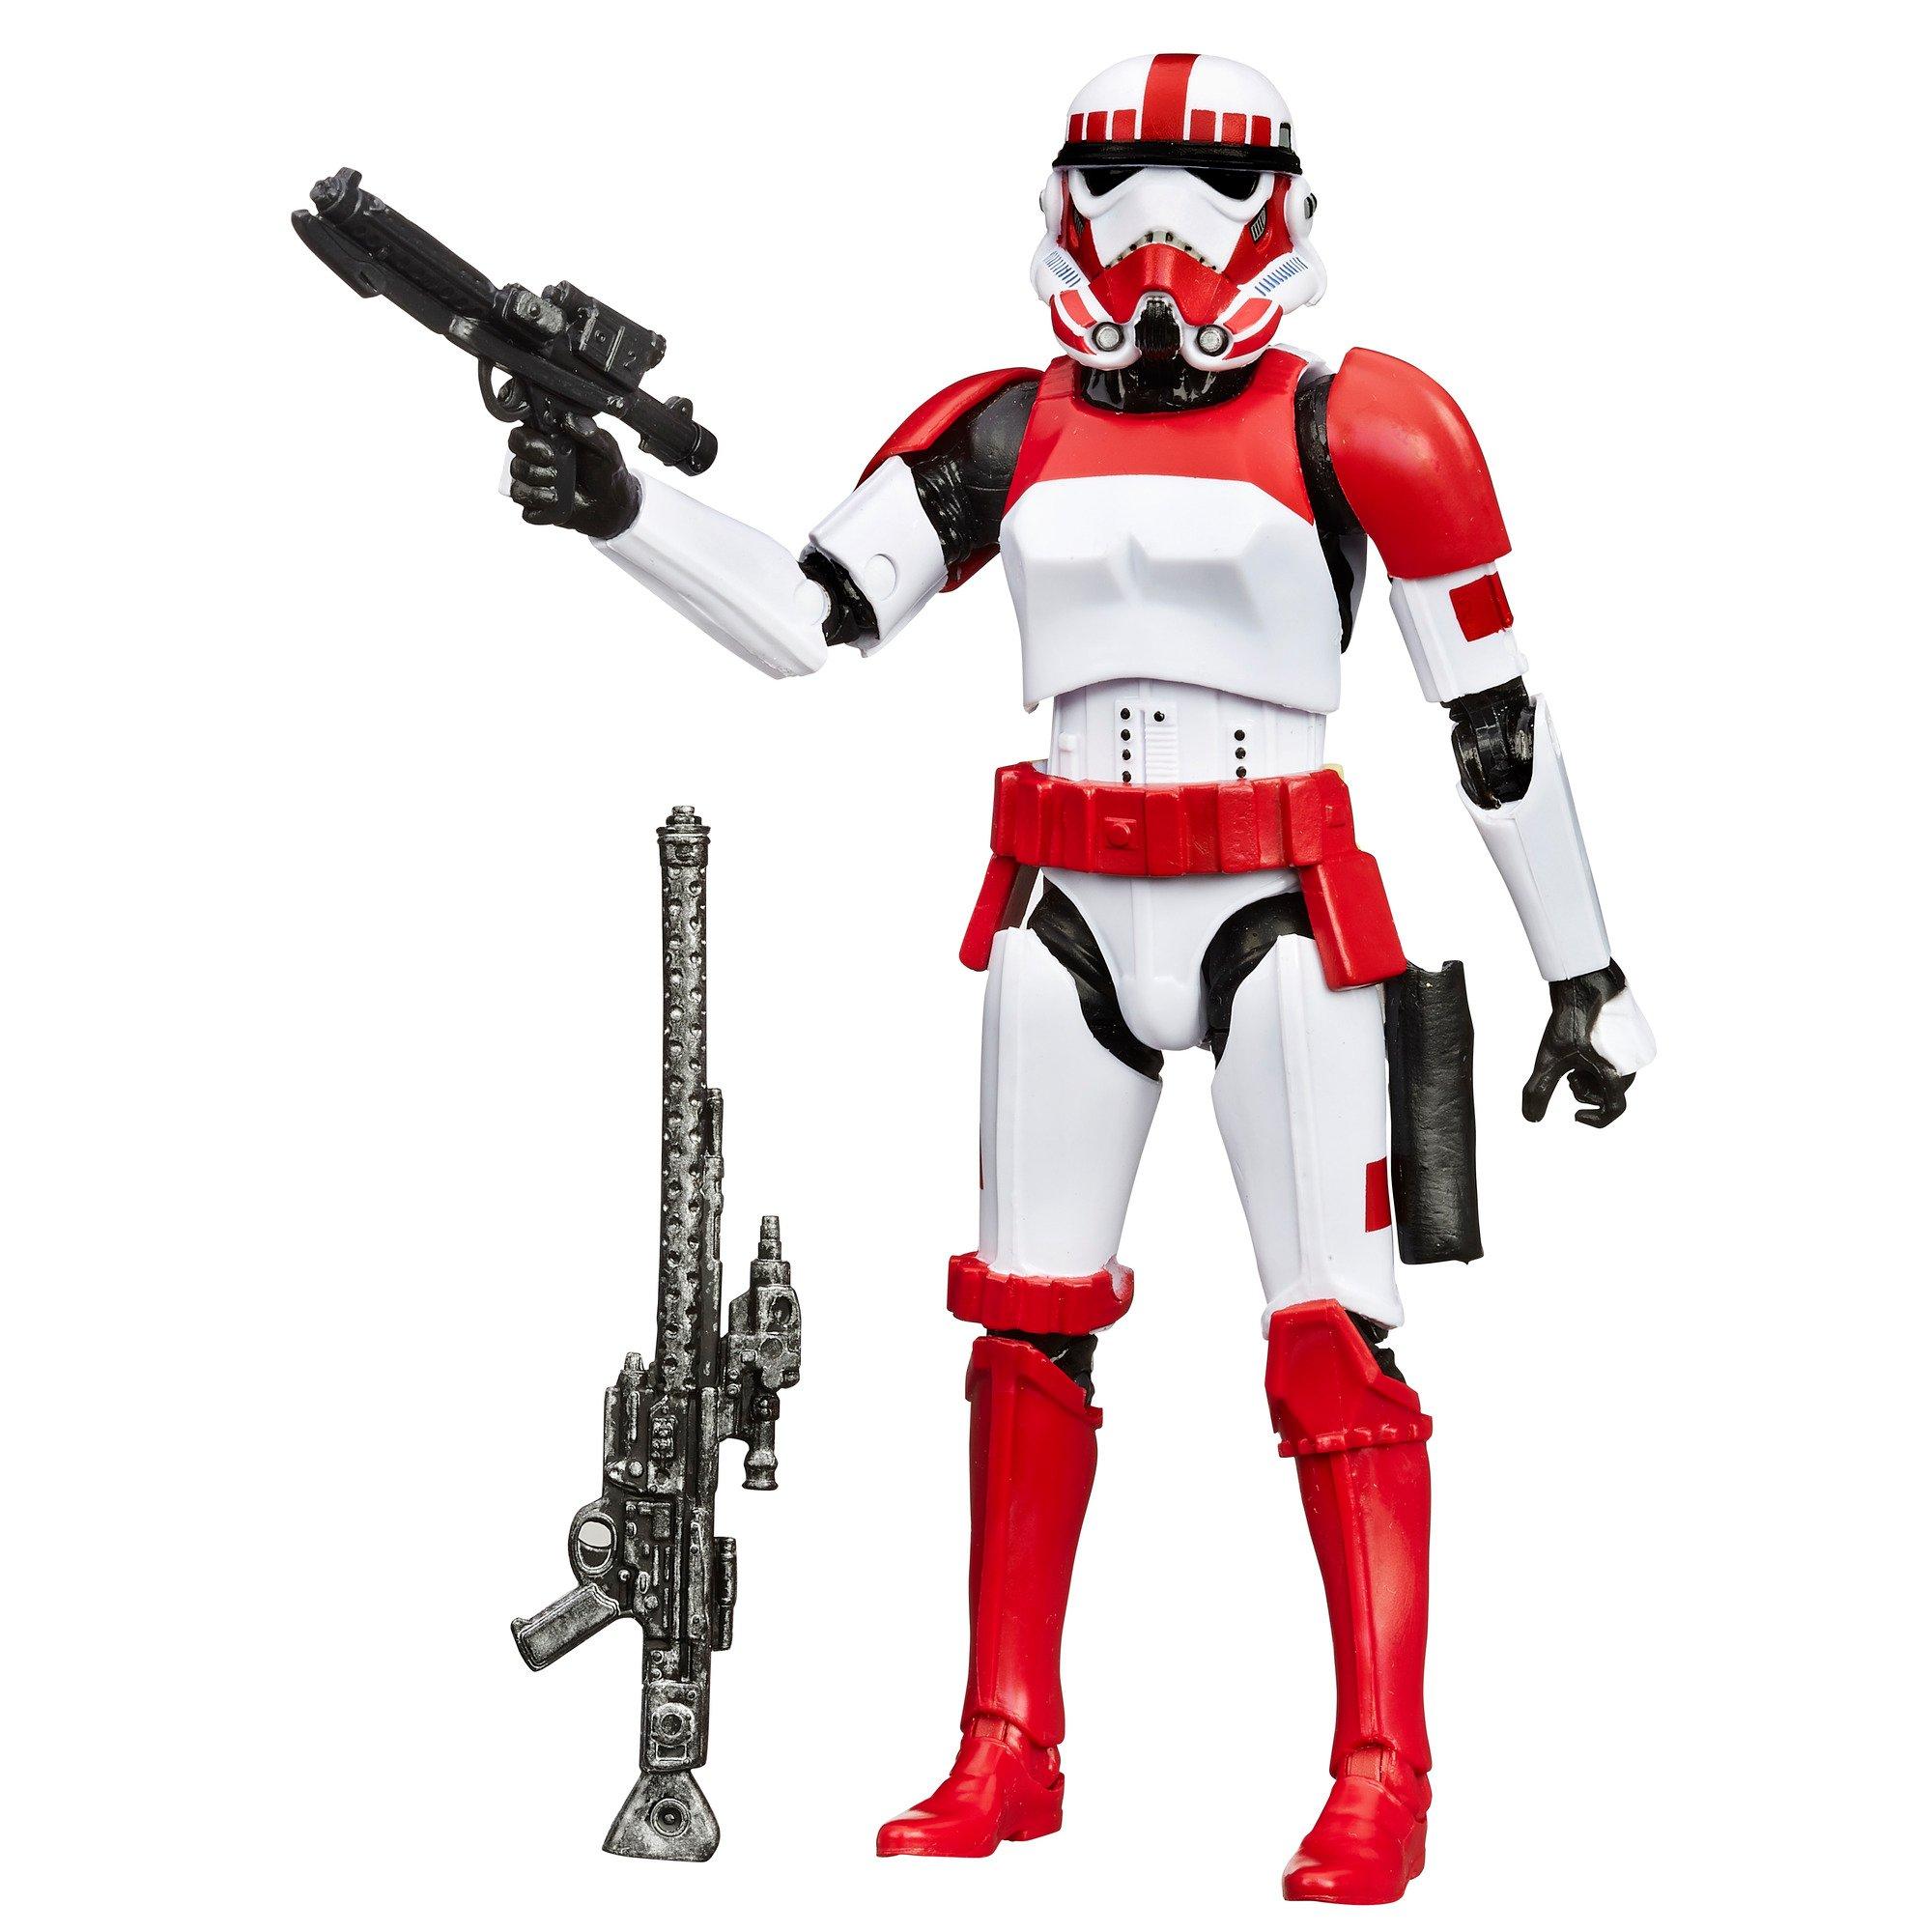 Hasbro Star Wars: The Black Series Battlefront Imperial Shock Trooper 6-in Action Figure